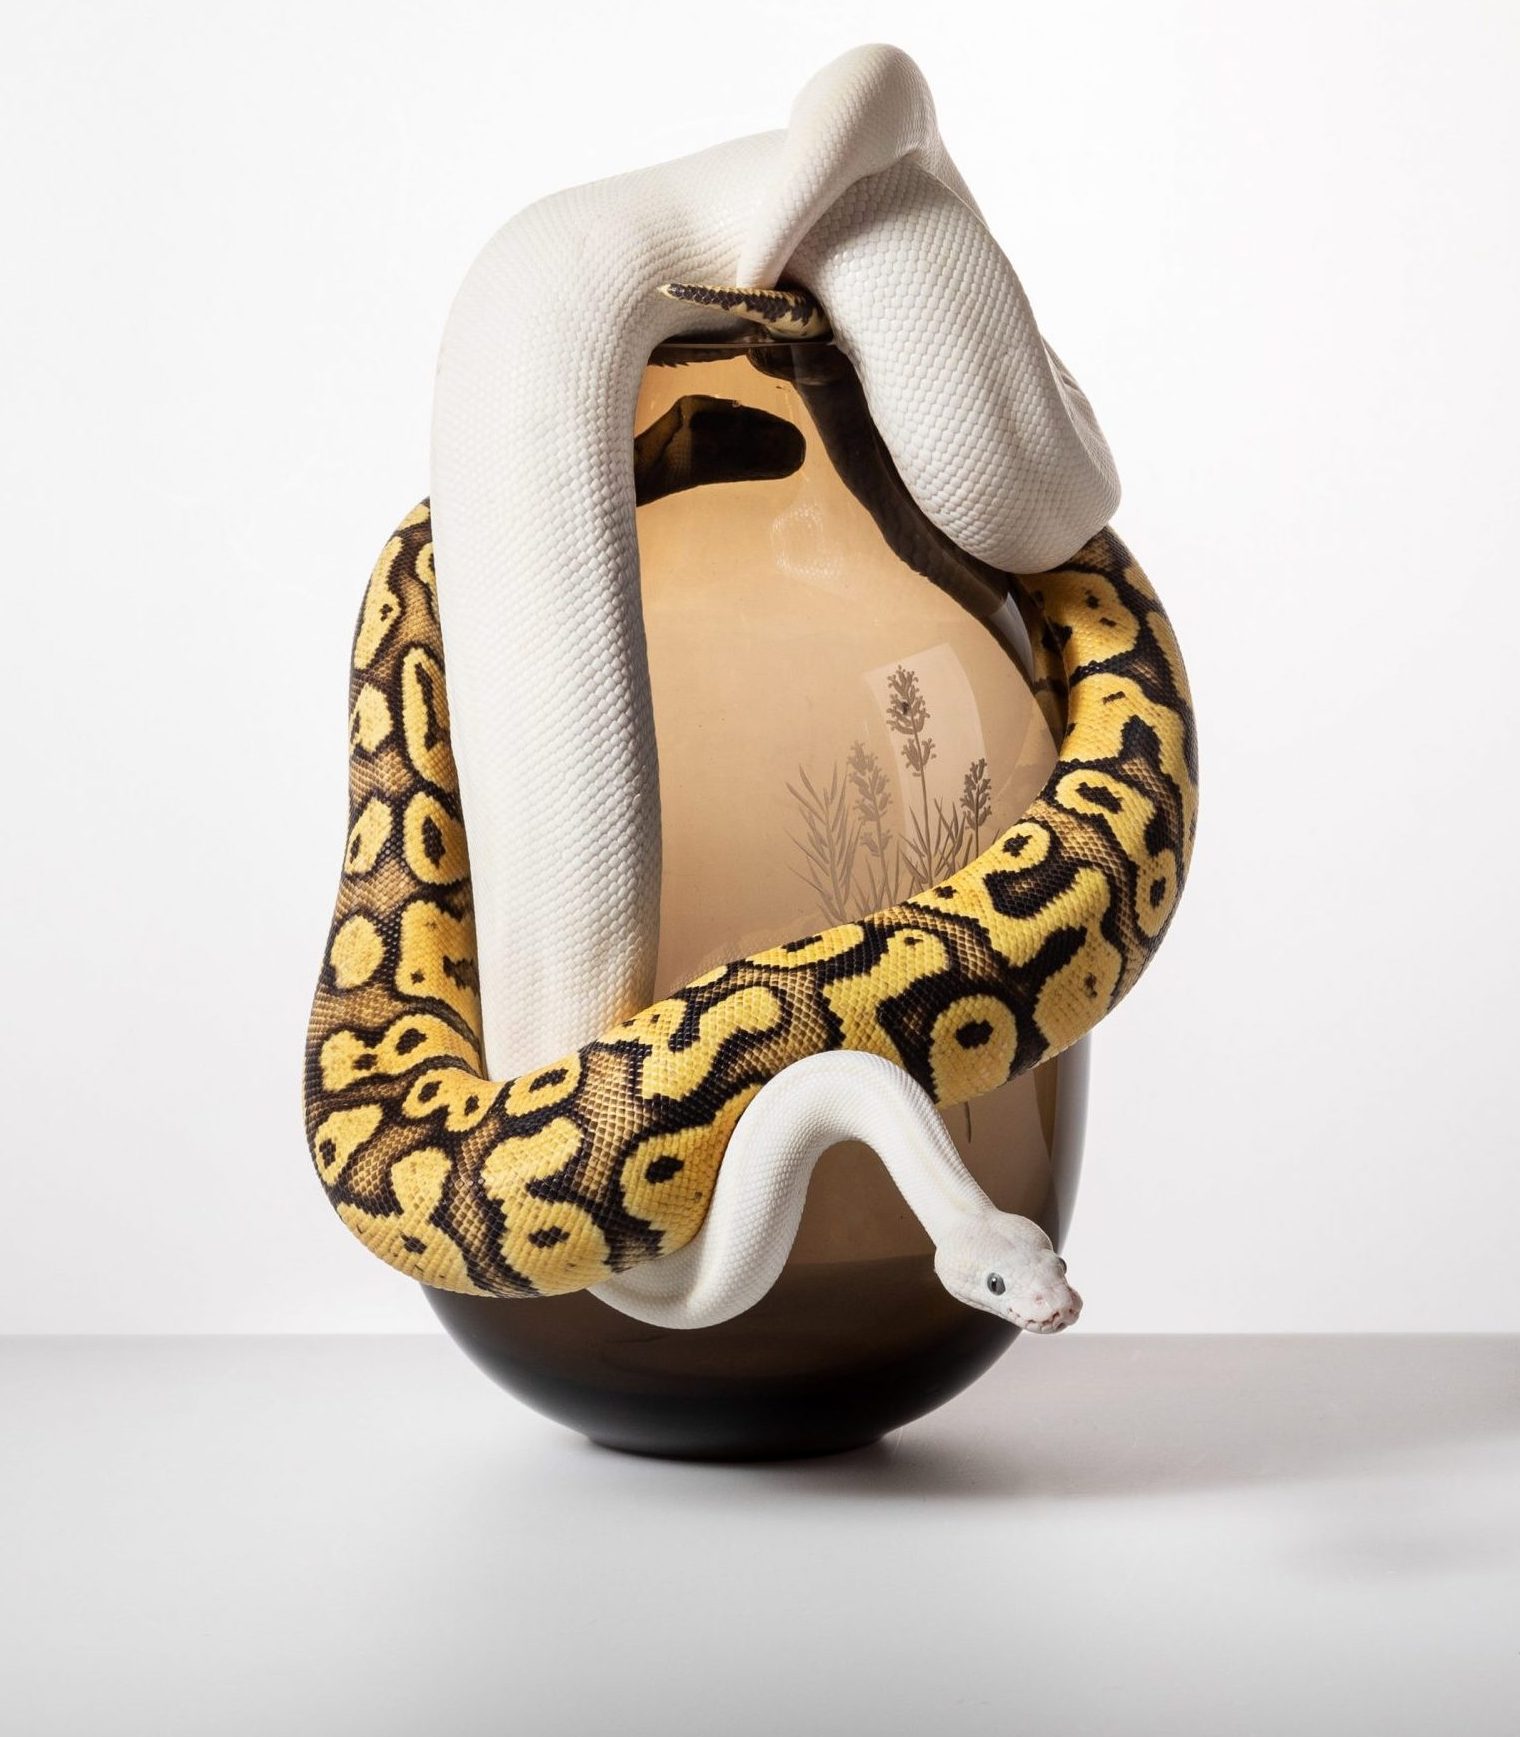 An image of a snake clinging to a brown glass